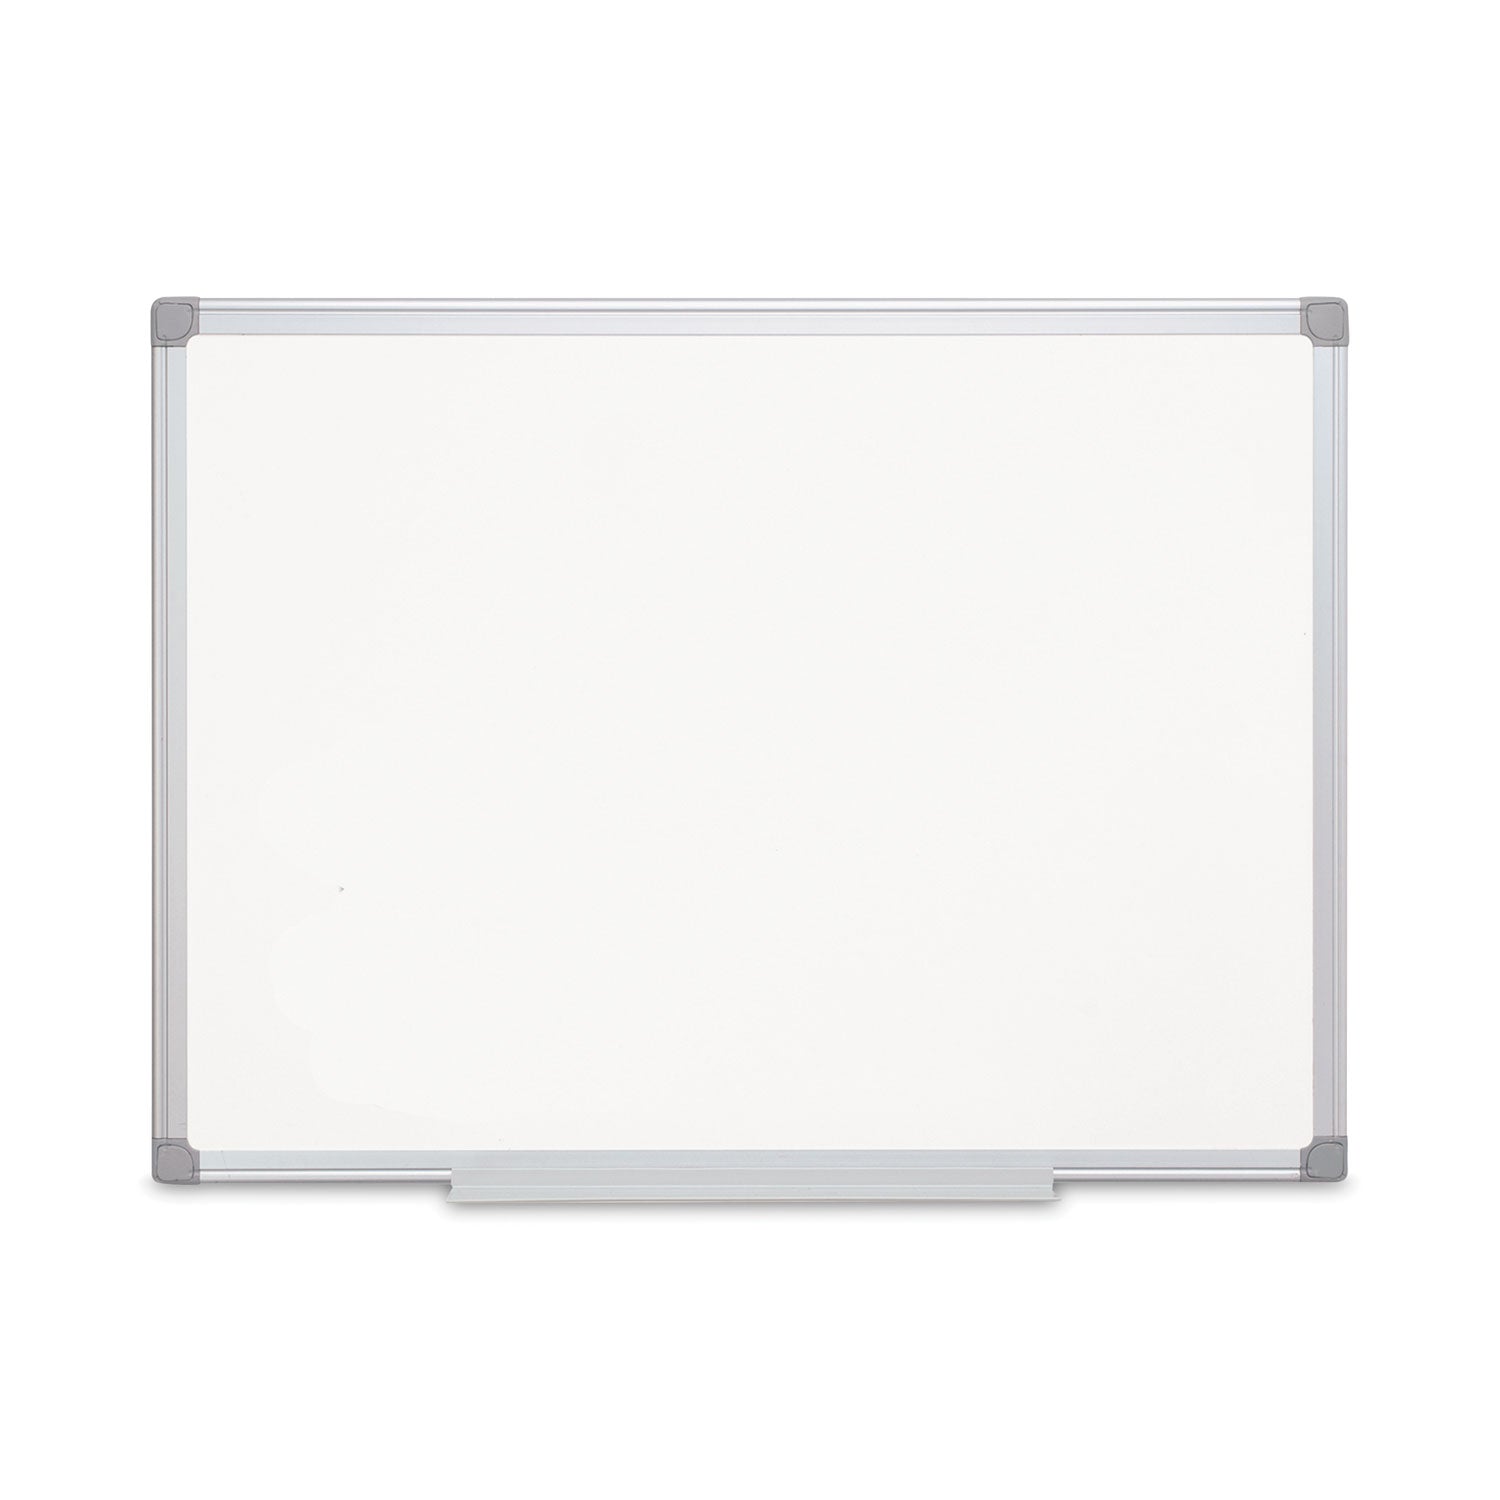 earth-silver-easy-clean-dry-erase-board-48-x-36-white-surface-silver-aluminum-frame_bvccr0820790 - 1